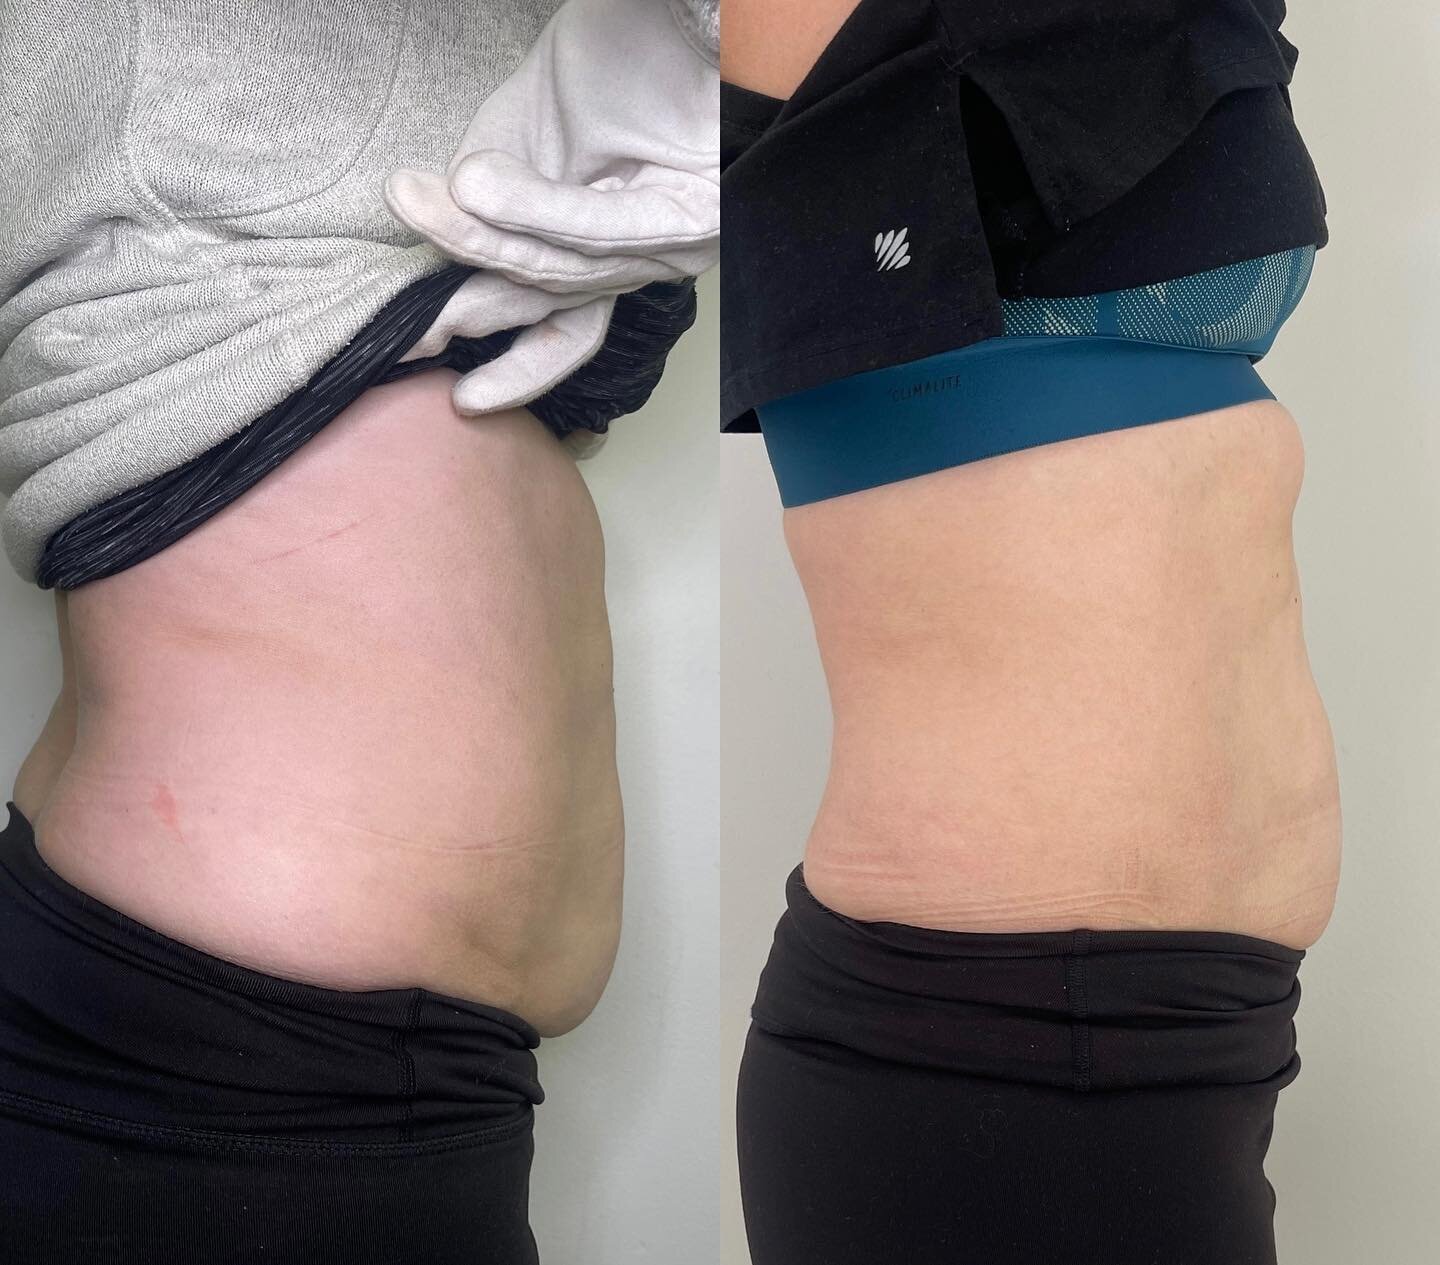 Another amazing result from our Body Contouring. An absolute game changer to kick start or speed up any fitness/weight loss journey! 
&bull;
&bull;
&bull;
&bull;
&bull;
#slimlux #globalbeautygroup #bodycontouring #bodycontour #fatdissolving #fatcav #